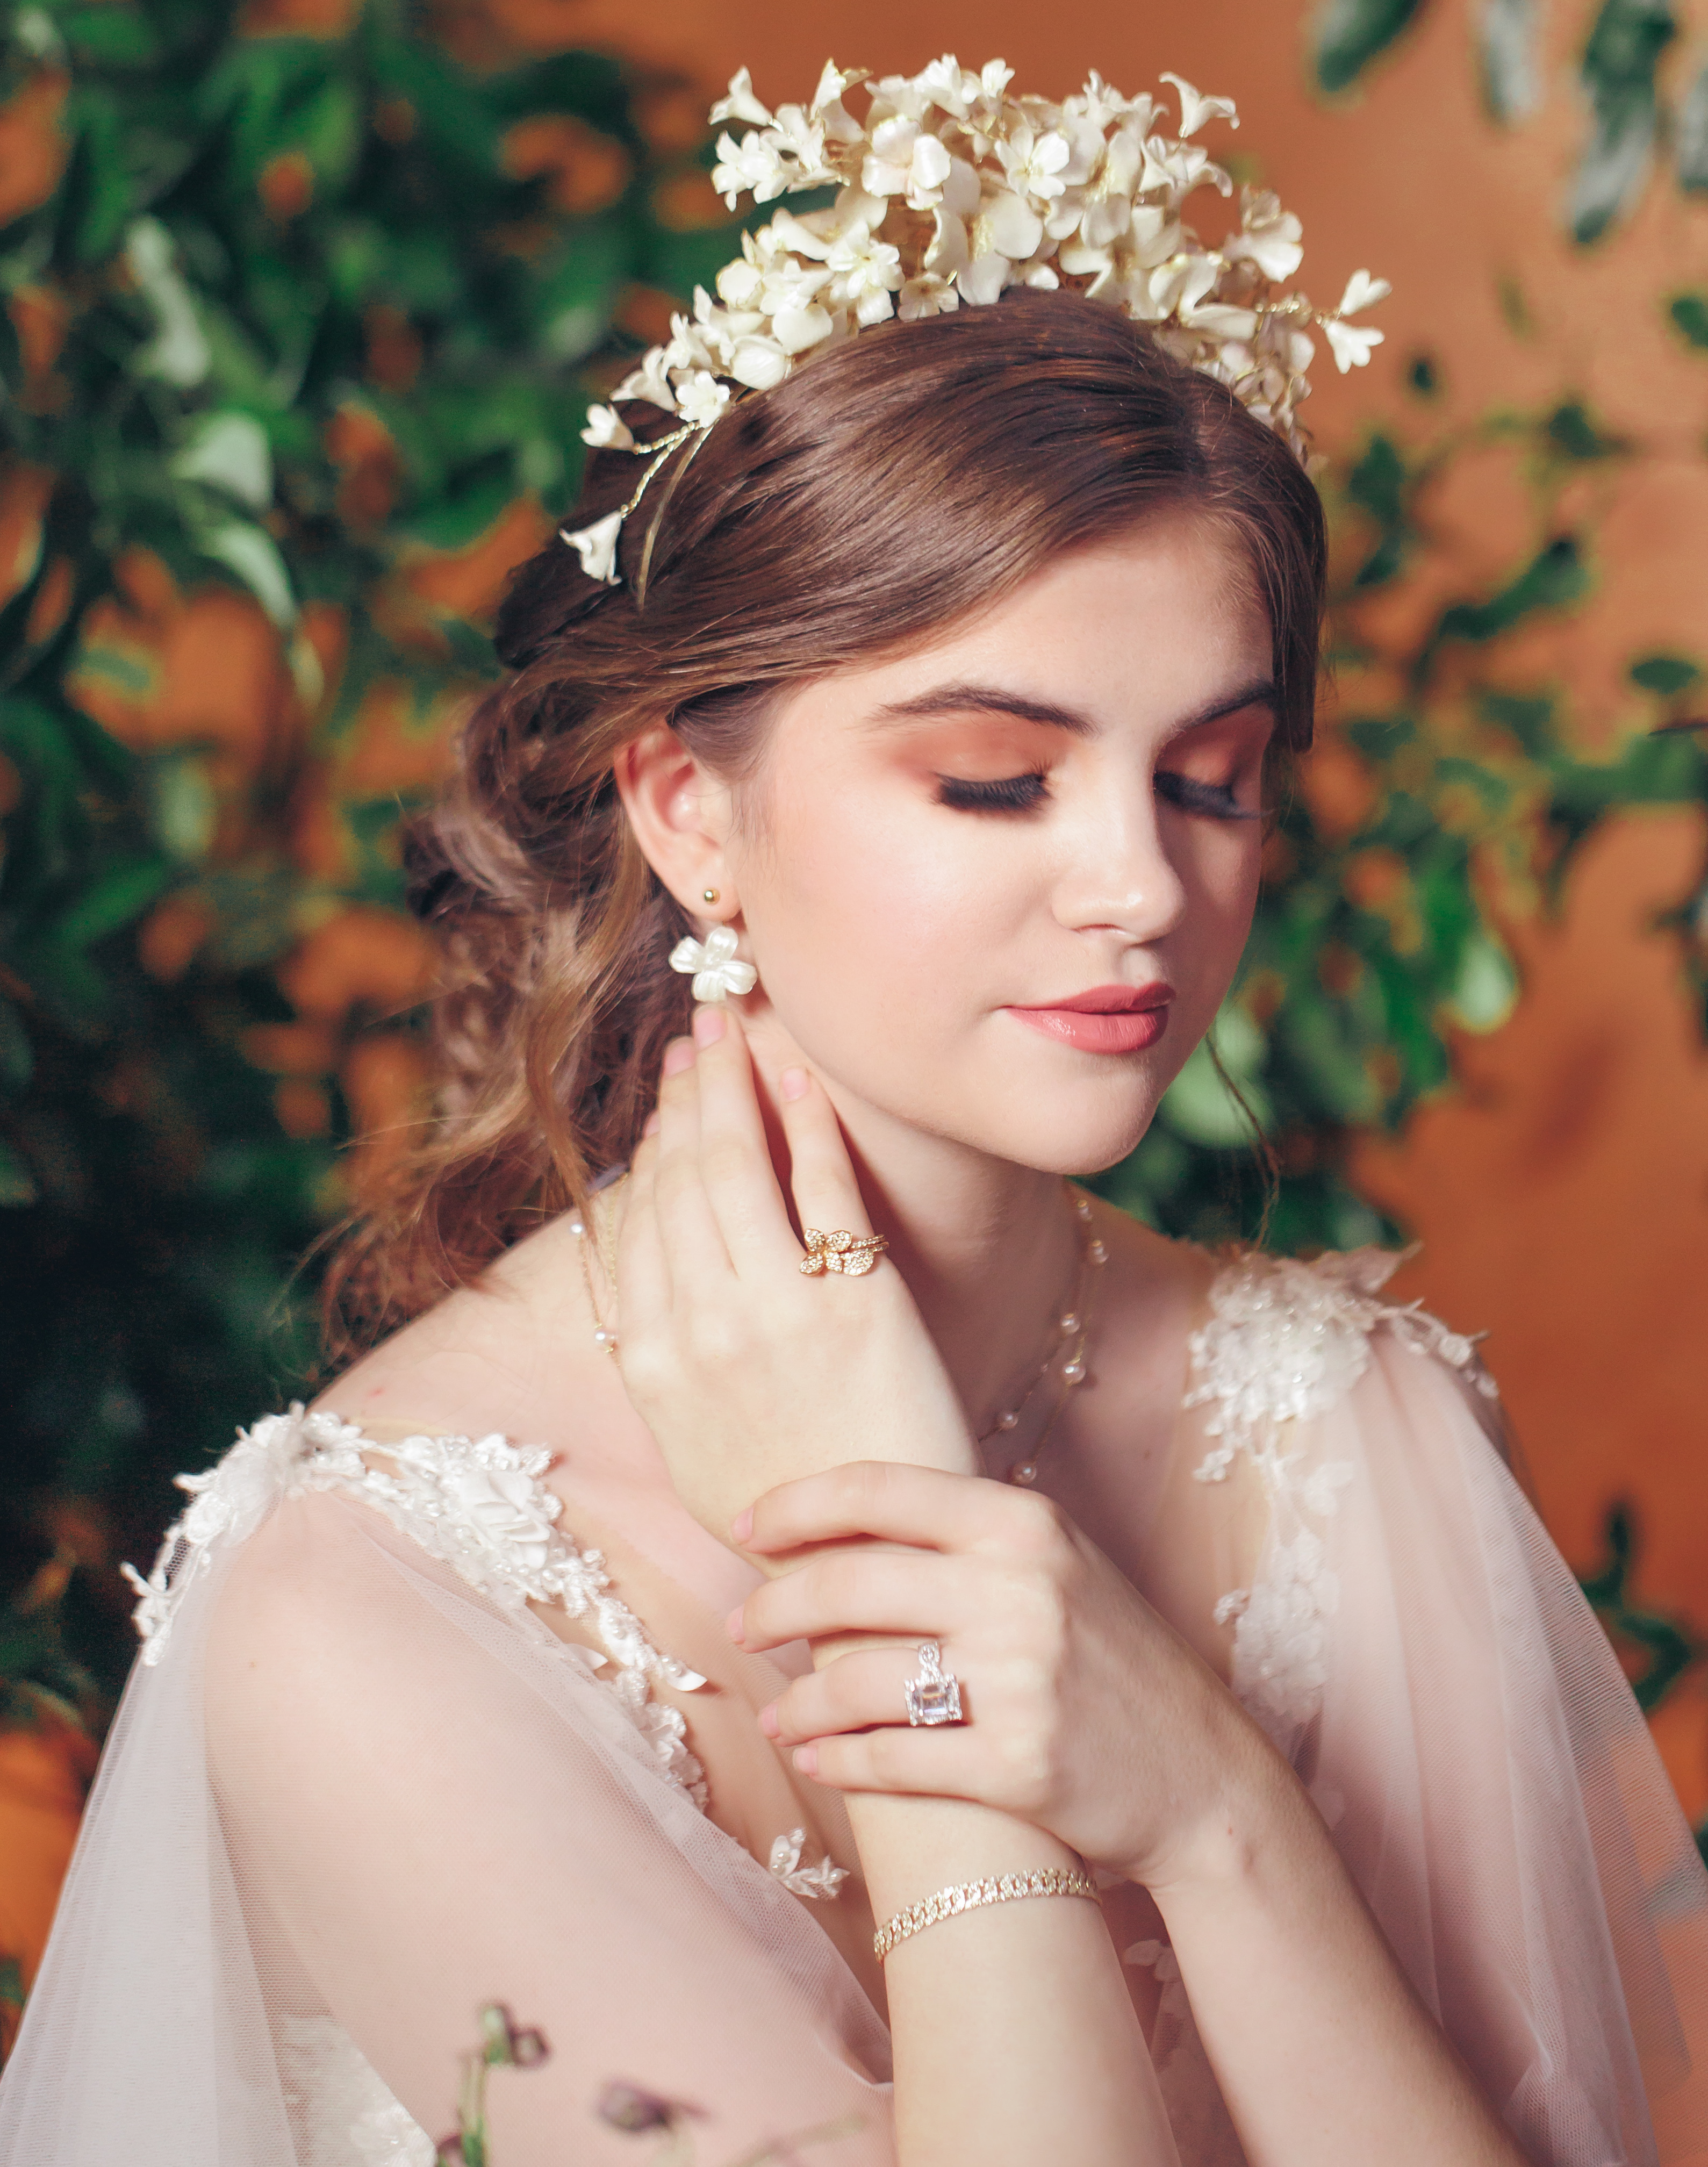 An up close photo of a bride closing her eyes and wearing a floral headpiece and luxury jewelry.